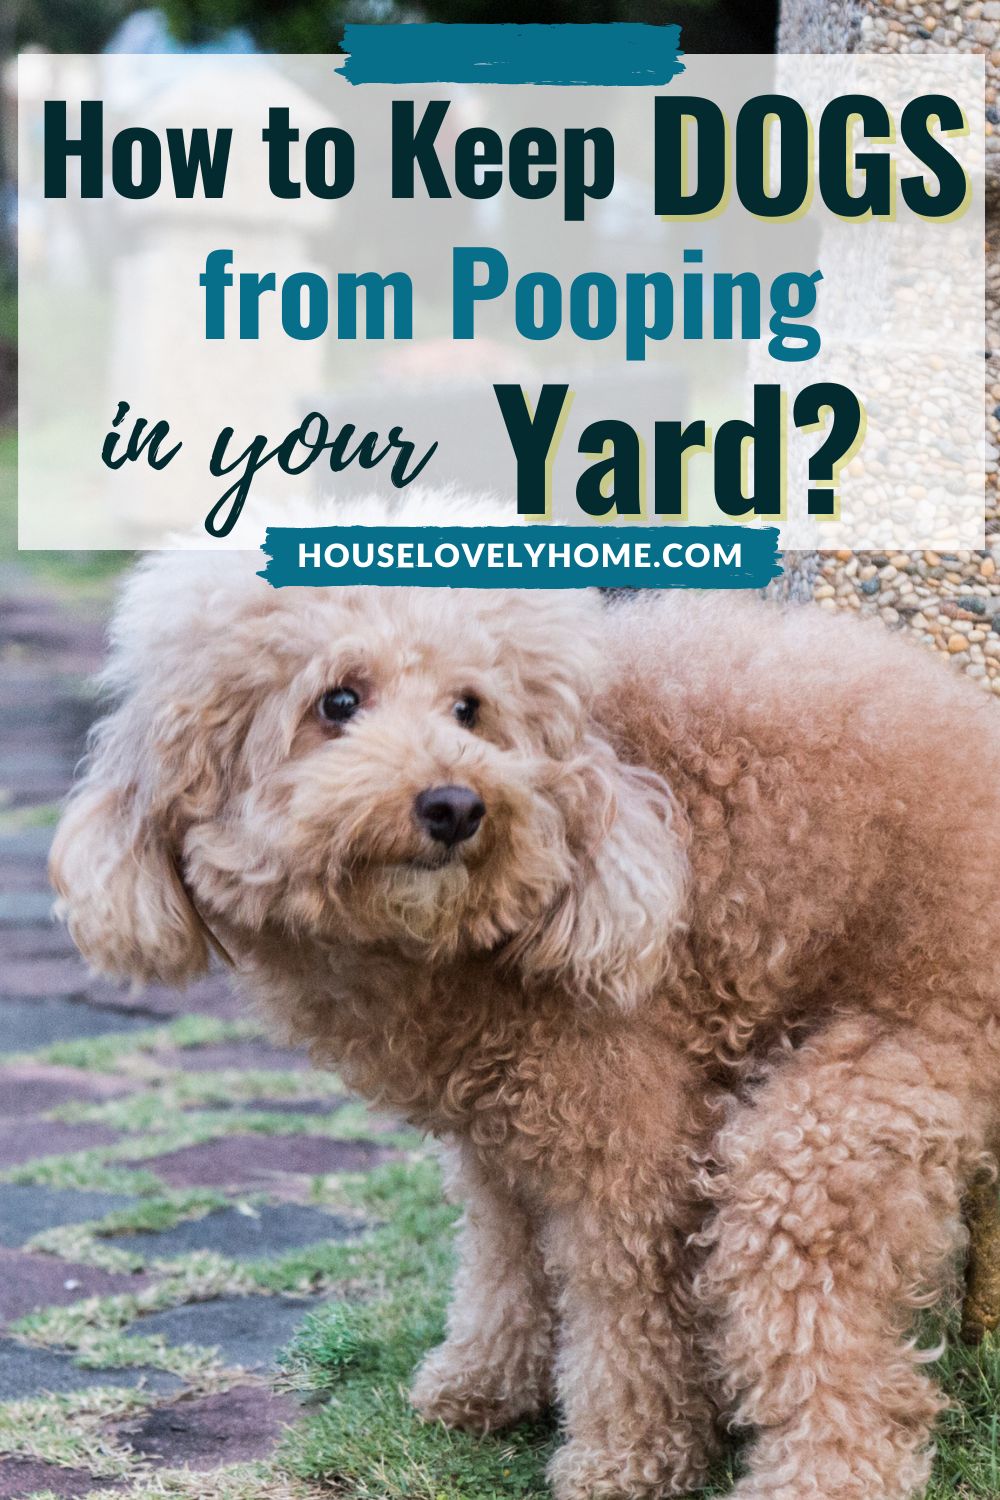 A cute dog squating on the ground with text overlays that read How to Keep Dogs From Pooping in Your Yard